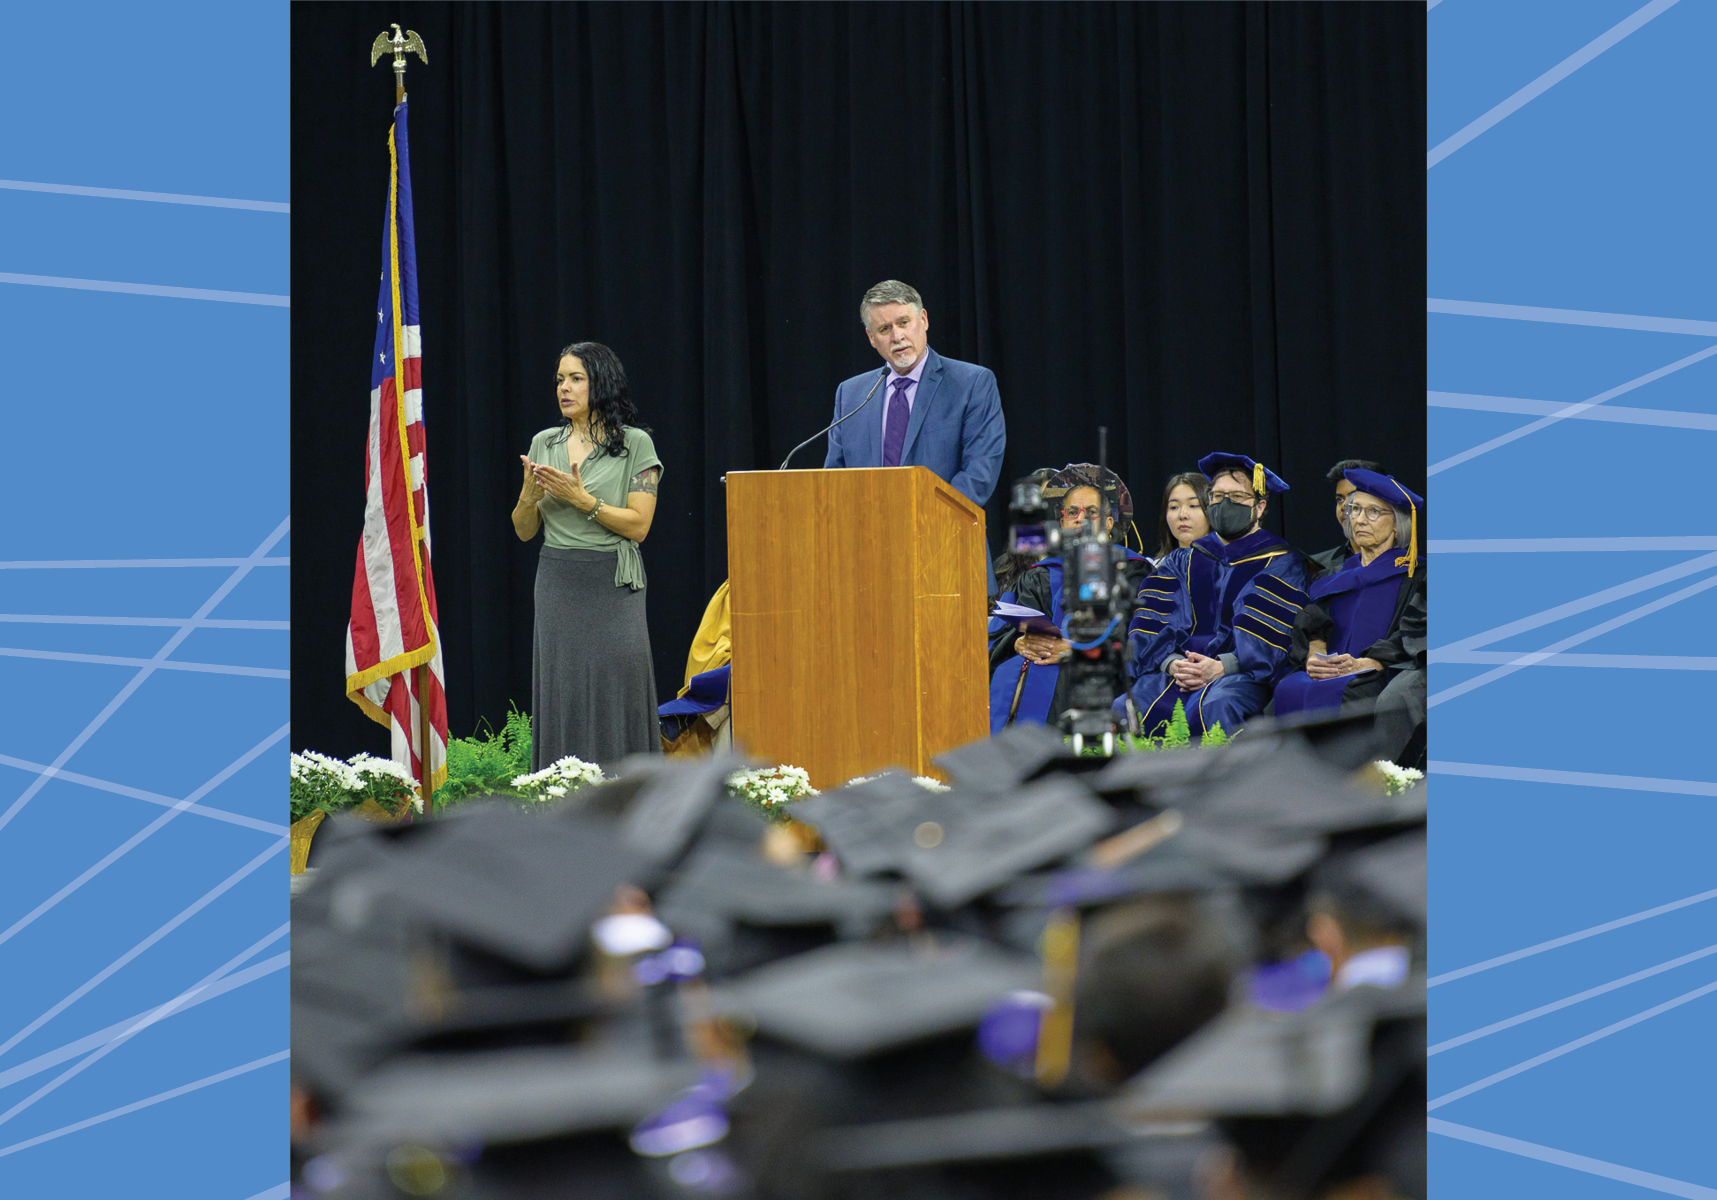 Tom Fay speaking at a podium in front of graduates.